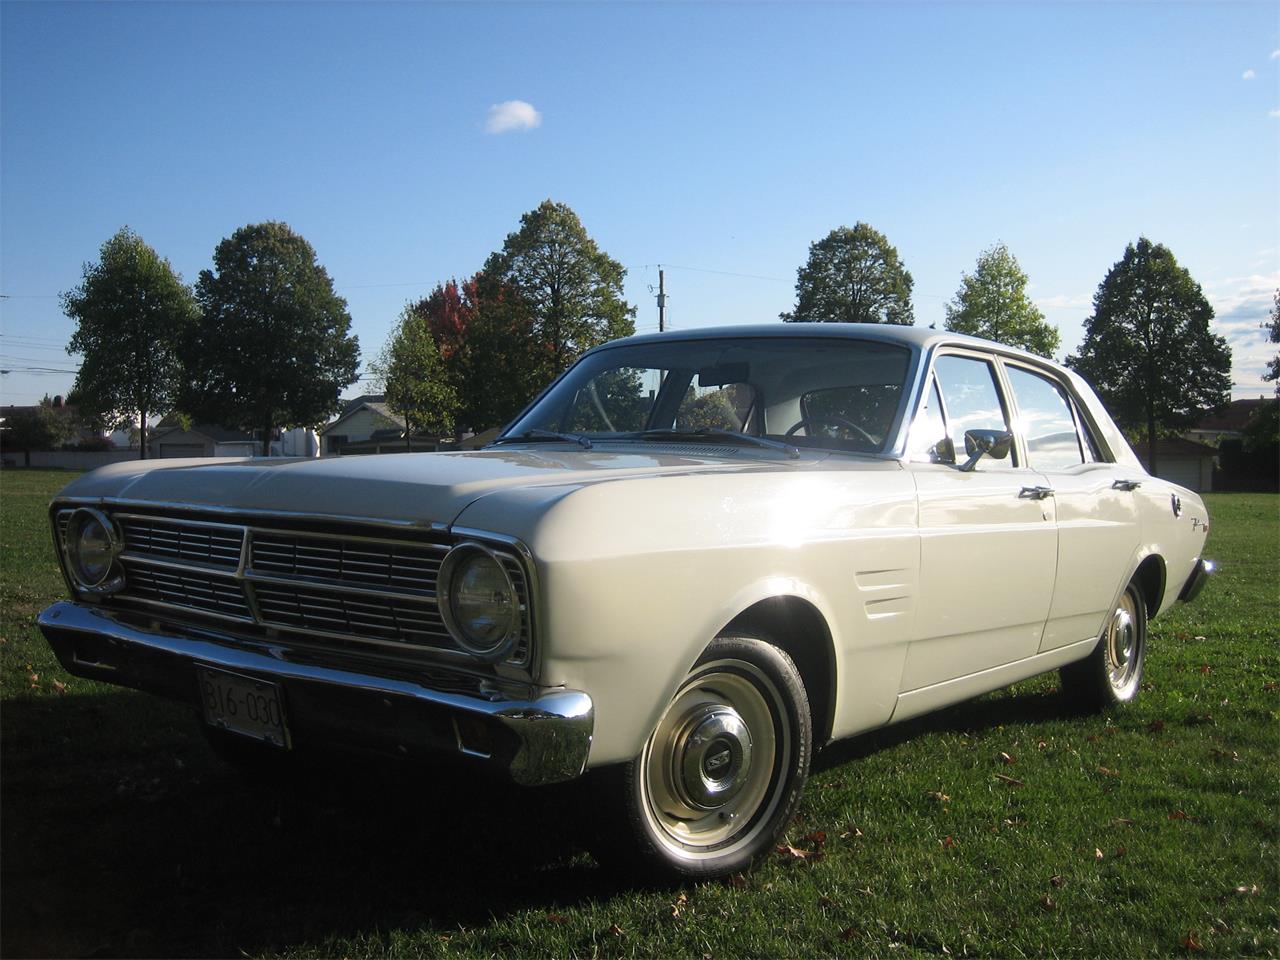 1967 ford falcon for sale classiccars com cc 1201026 1967 ford falcon for sale classiccars